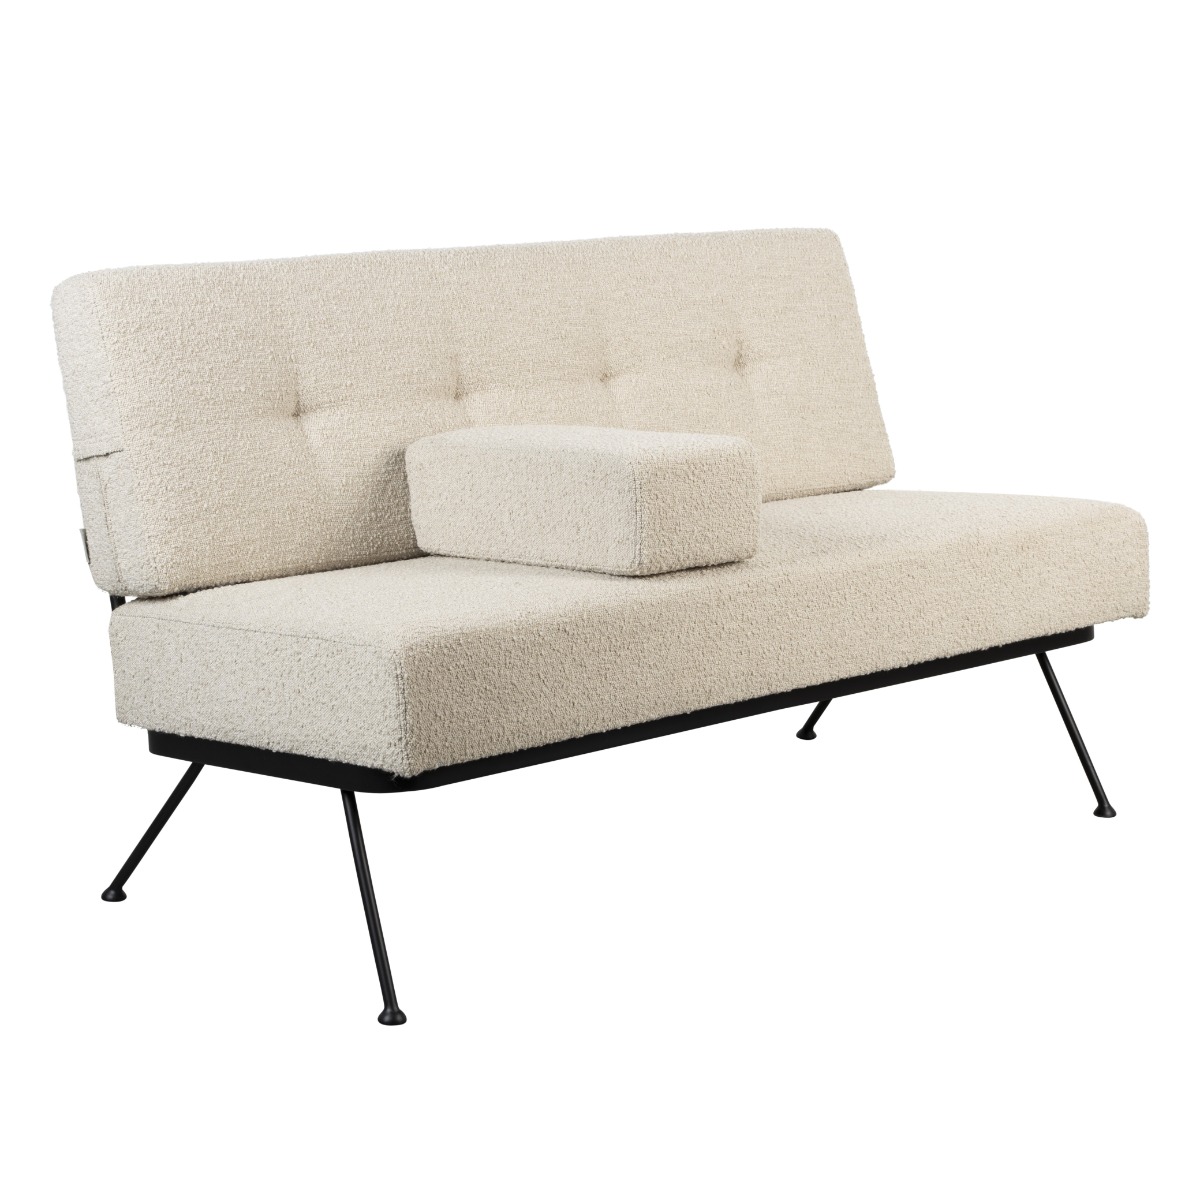 Sofa Bowie 2 seater